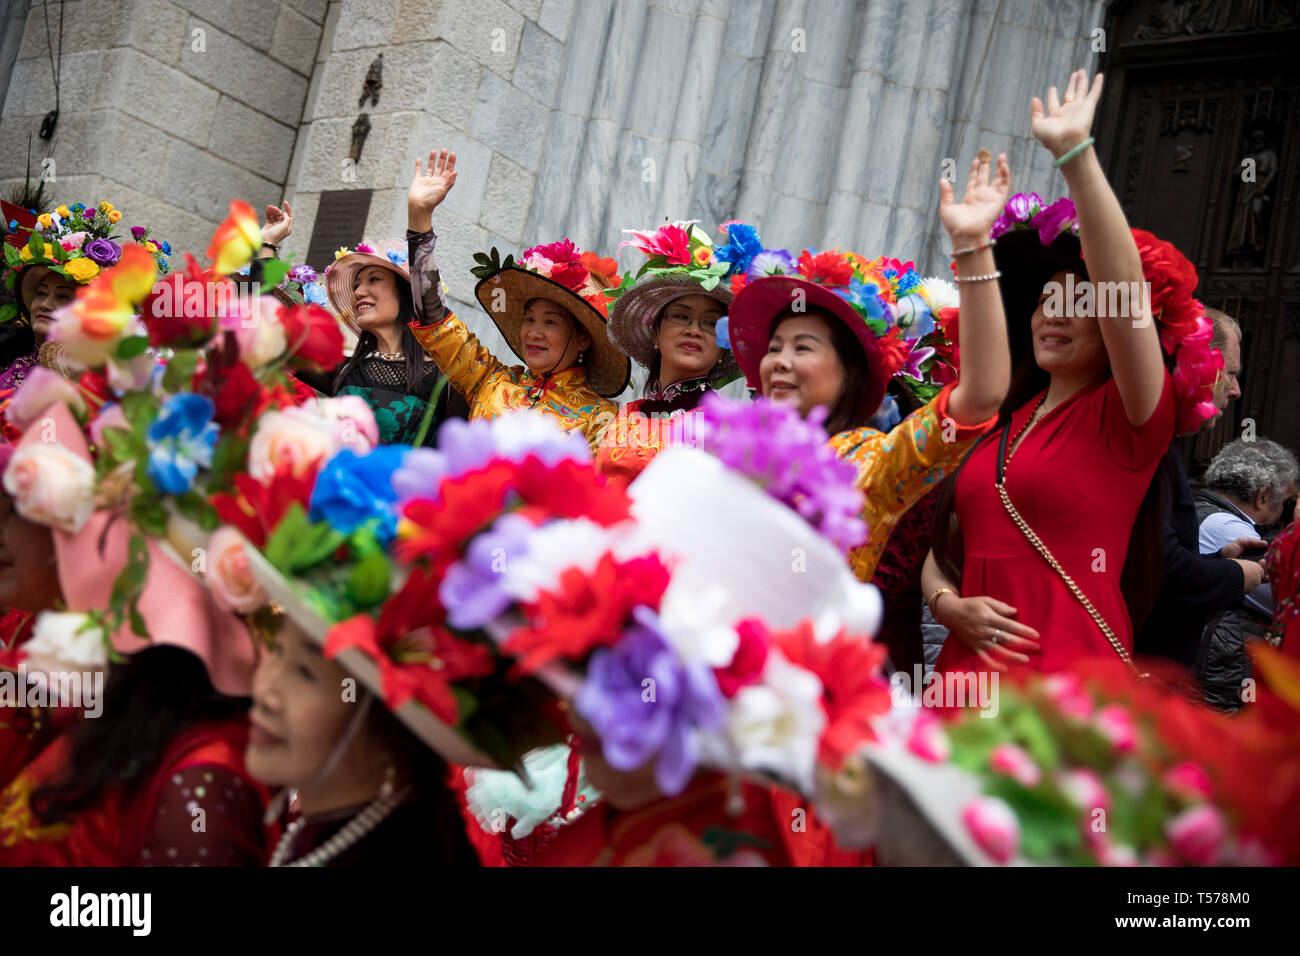 New York, USA. 21st Apr, 2019. Members of the Chinese Qipao Society of New York pose for photographs during the annual Easter Parade and Easter Bonnet Festival in New York, the United States, April 21, 2019. Adults, children and even pets in creative colorful bonnets and outfits participated in the annual Easter Parade and Easter Bonnet Festival in New York on Sunday, which attracted thousands of local residents and tourists. The pageant is a New York City tradition that stretches back to the 1870s. Credit: Michael Nagle/Xinhua/Alamy Live News Stock Photo